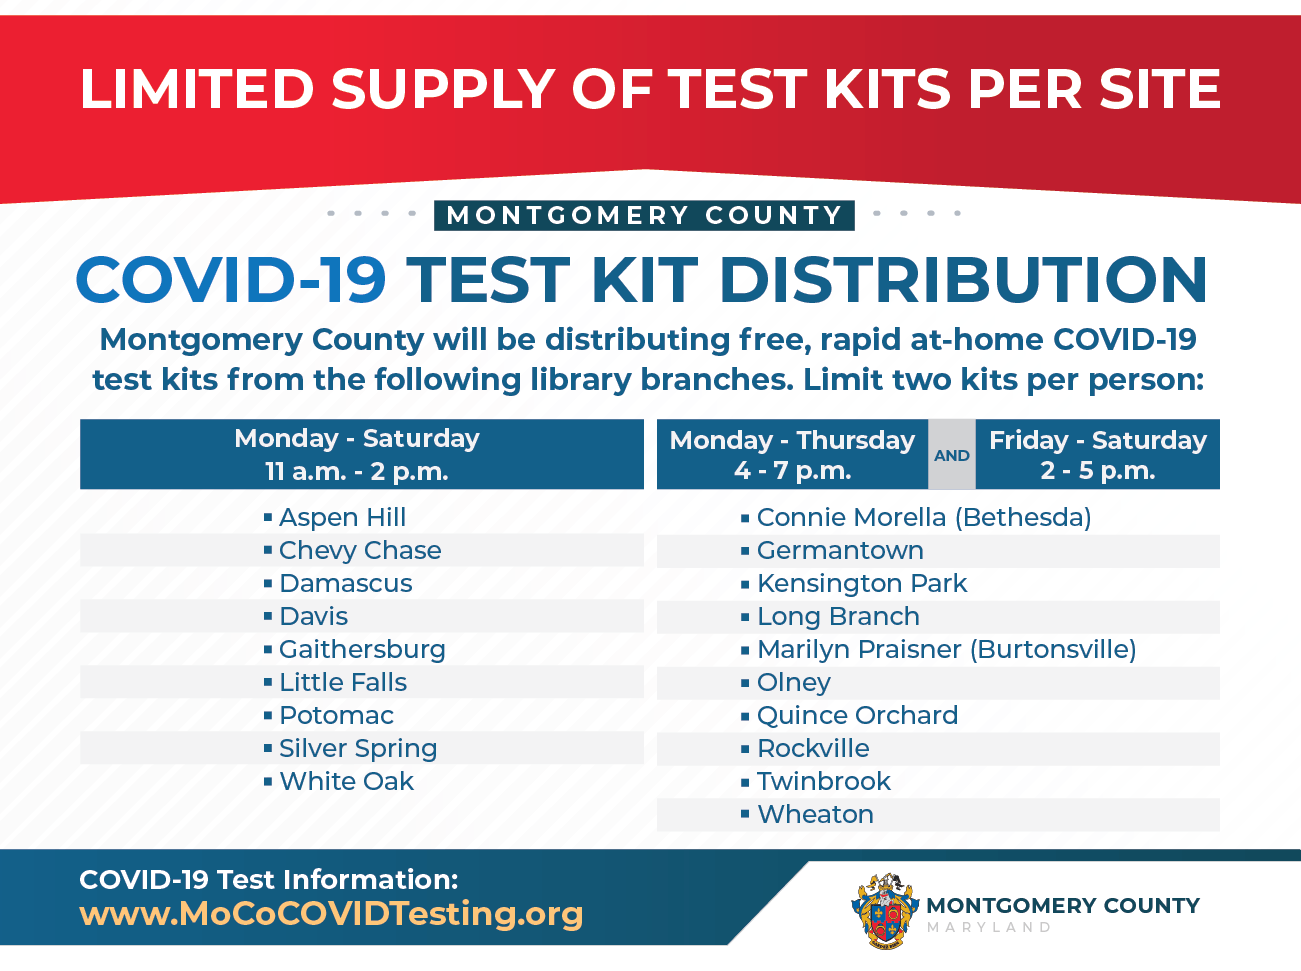 Covid-19 test kit distribution montgomery county will be distributing free, rapid at-home covid-19 test kits for residents only. limit two kits per person.